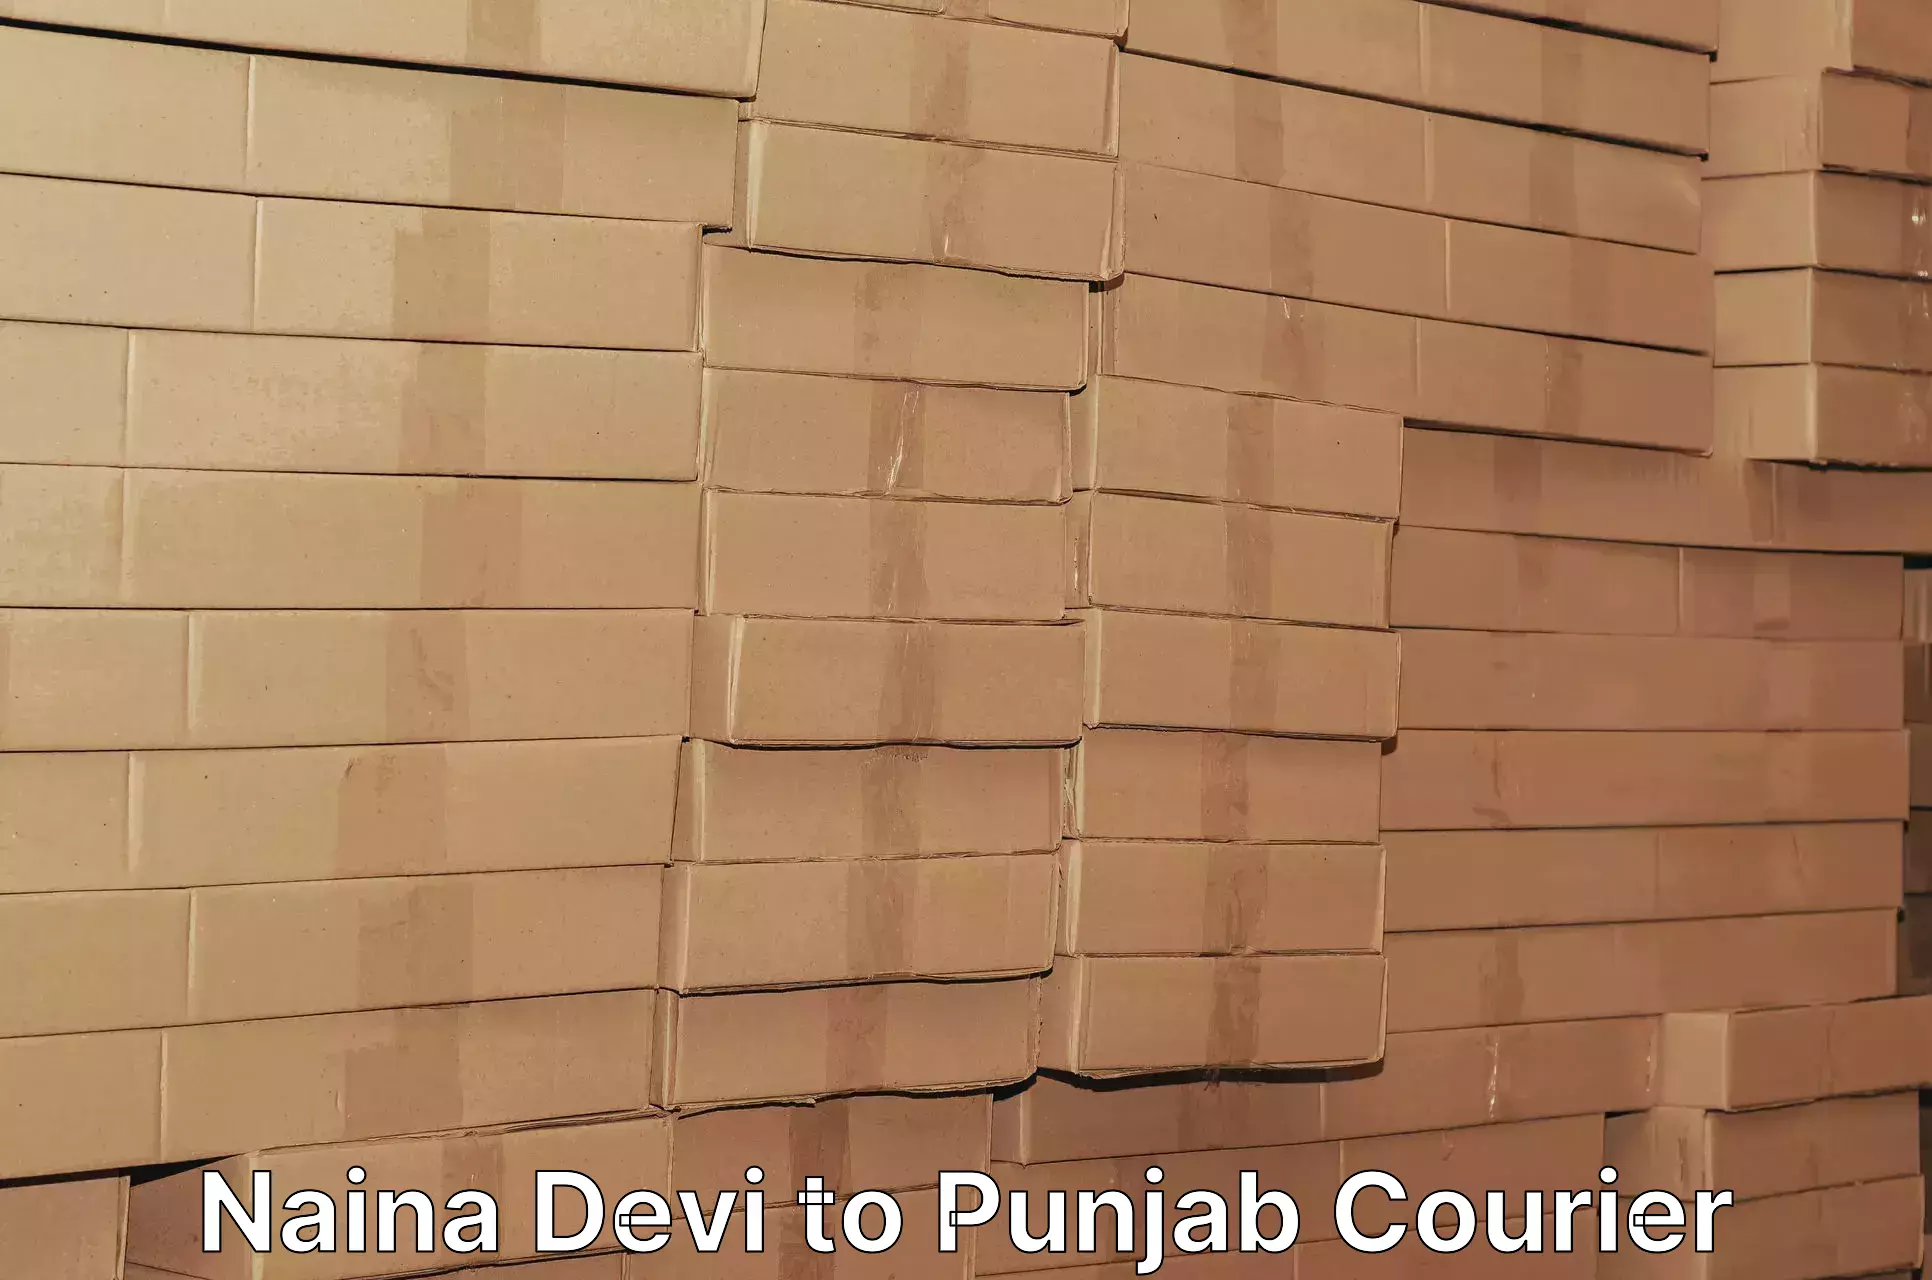 Nationwide courier service Naina Devi to Punjab